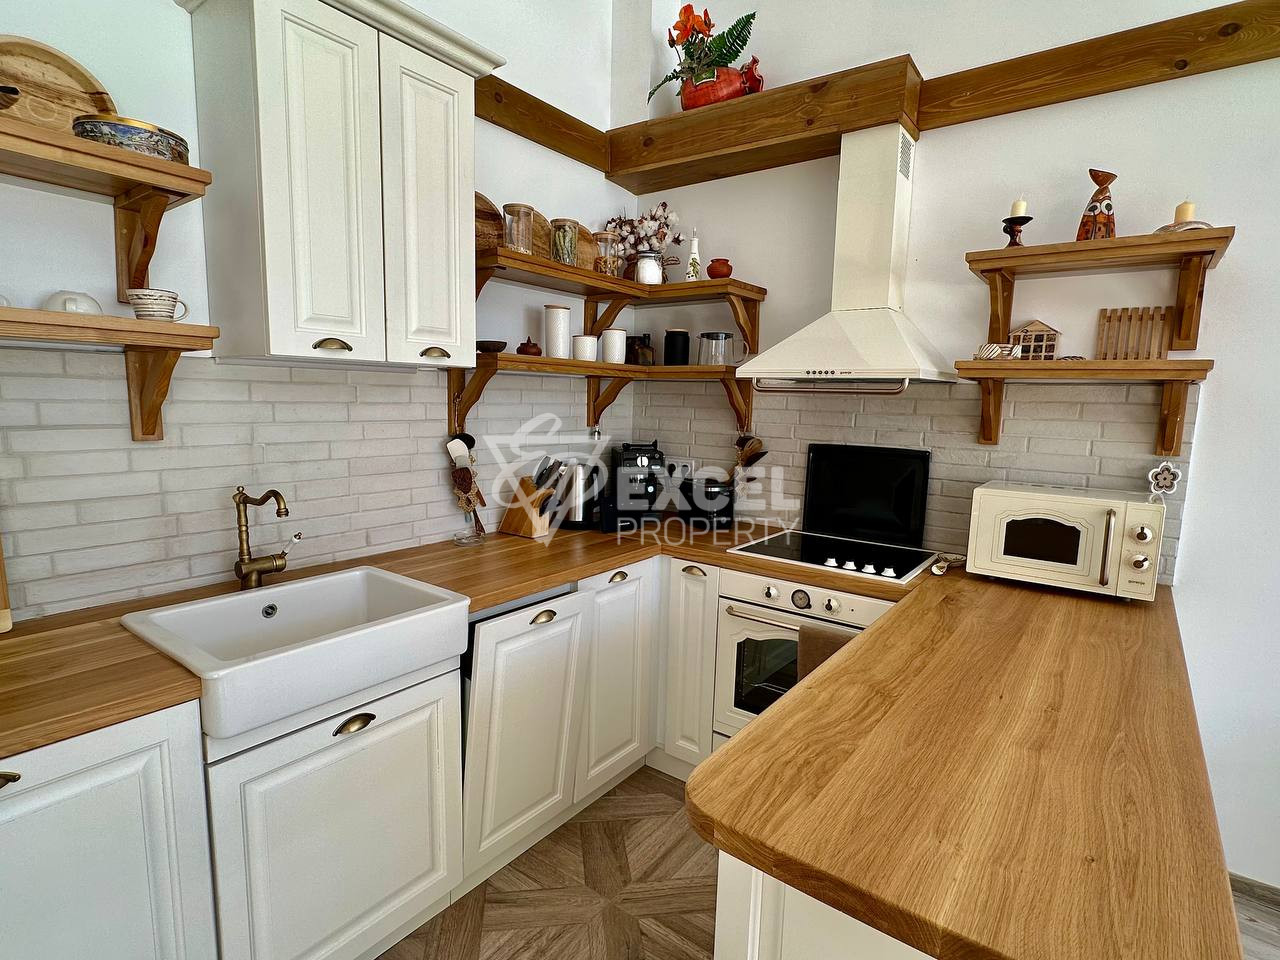 Alpine idyll: One-story two bedroom house with office for sale, close to Pirin Golf